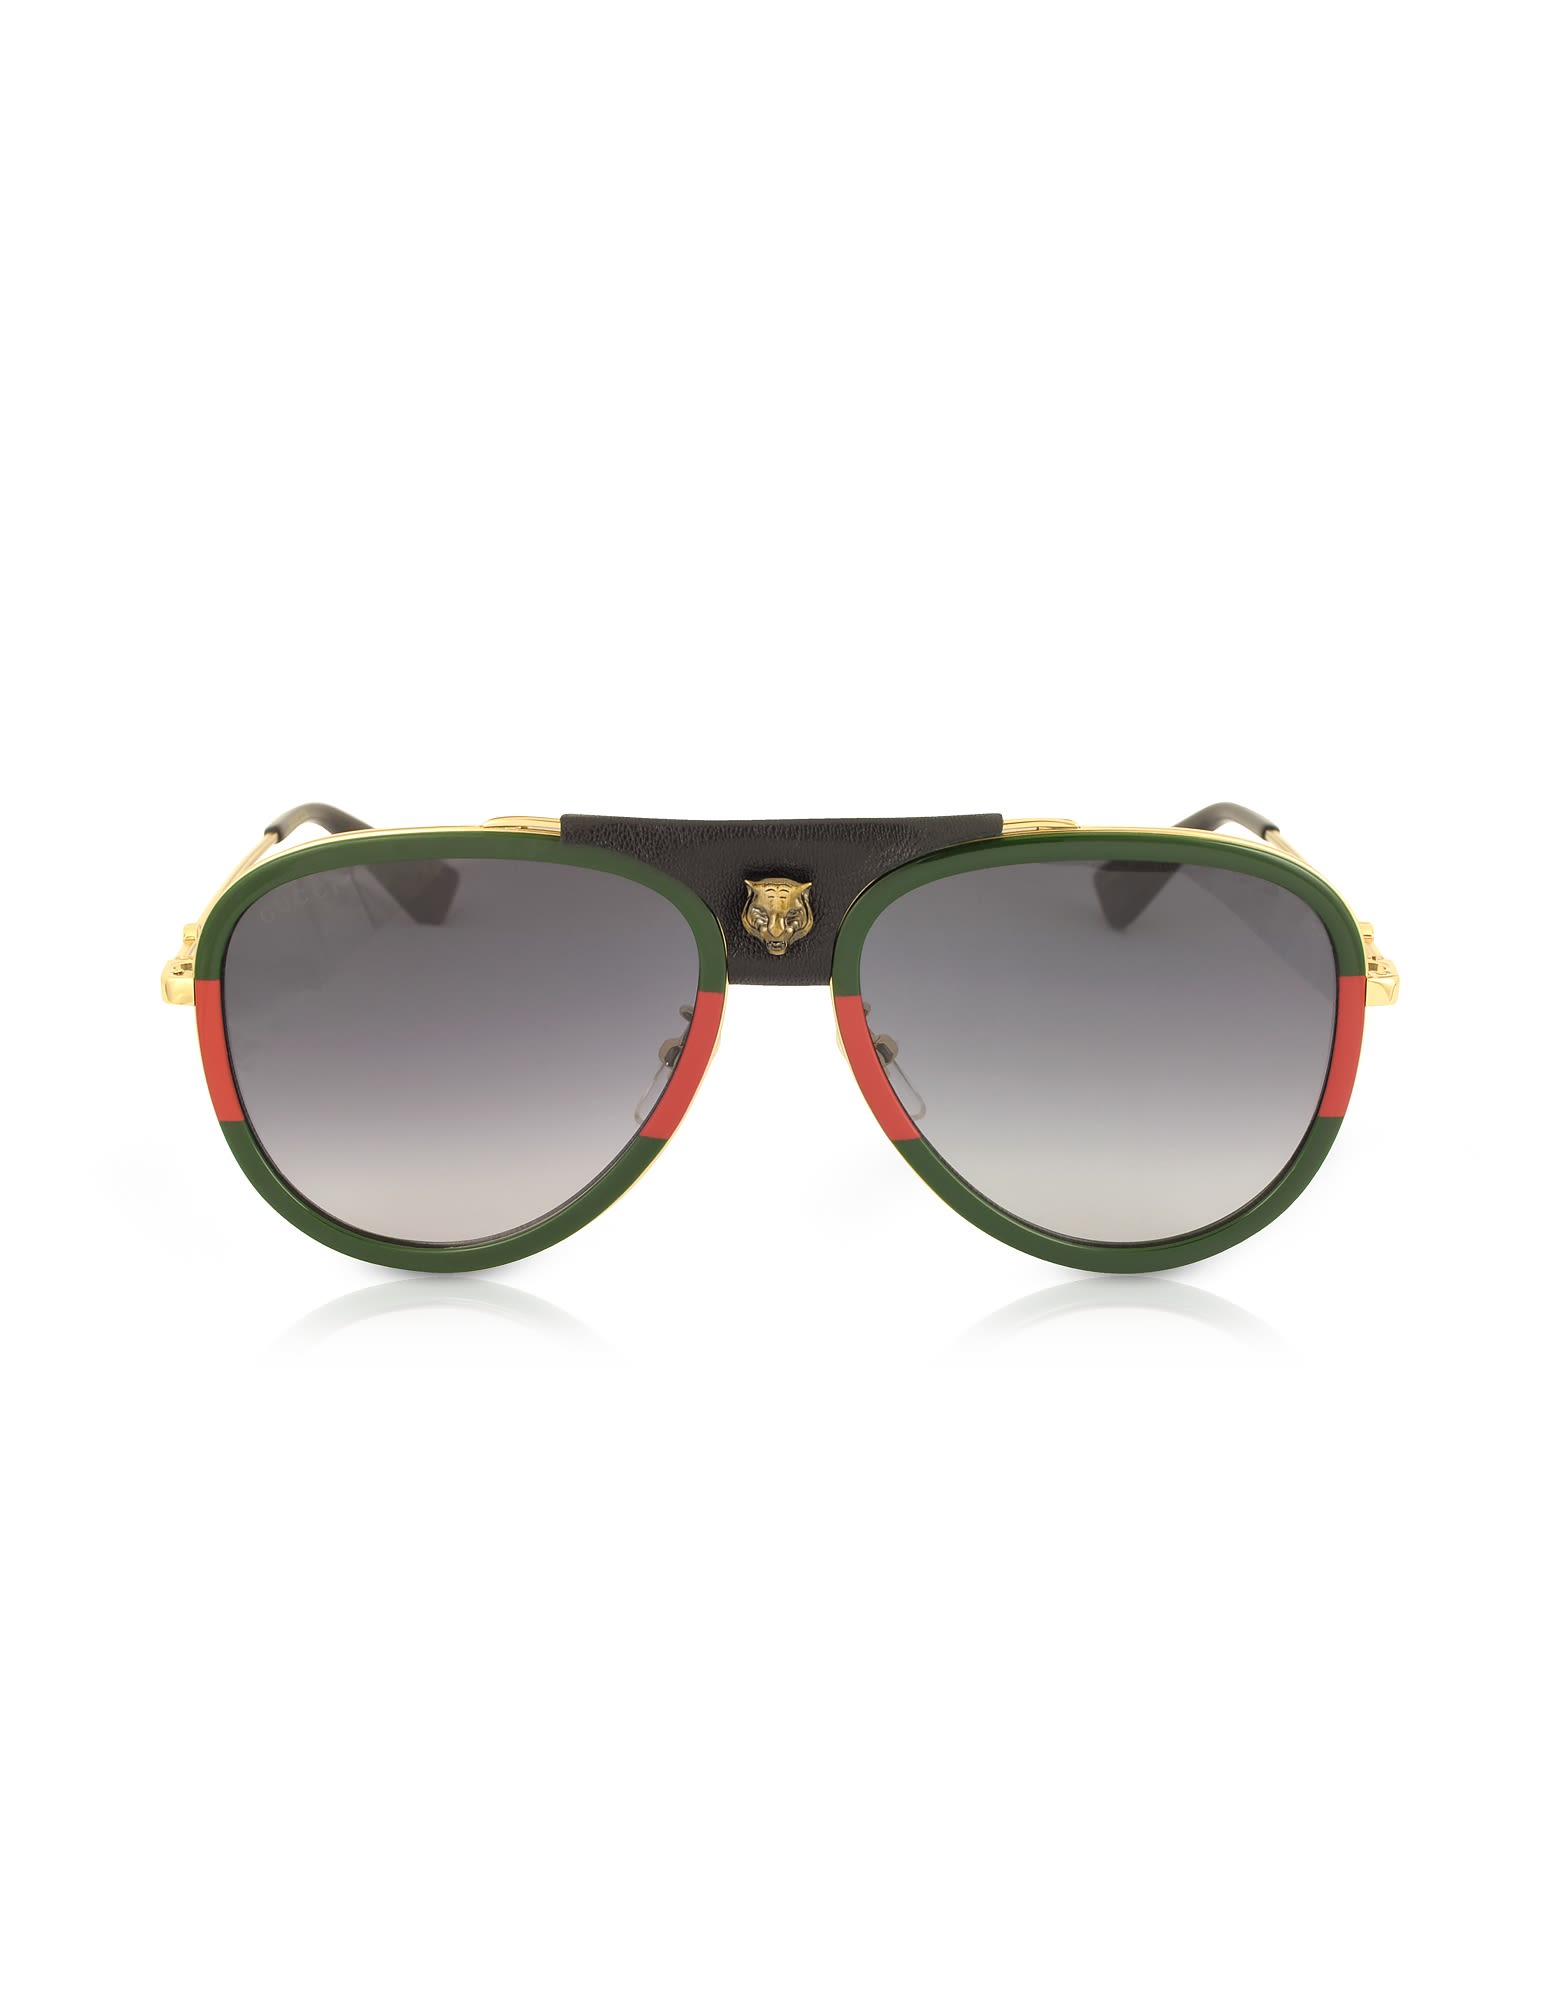 GUCCI GG0062S AVIATOR GOLD METAL AND BLACK LEATHER SUNGLASSES,10593318